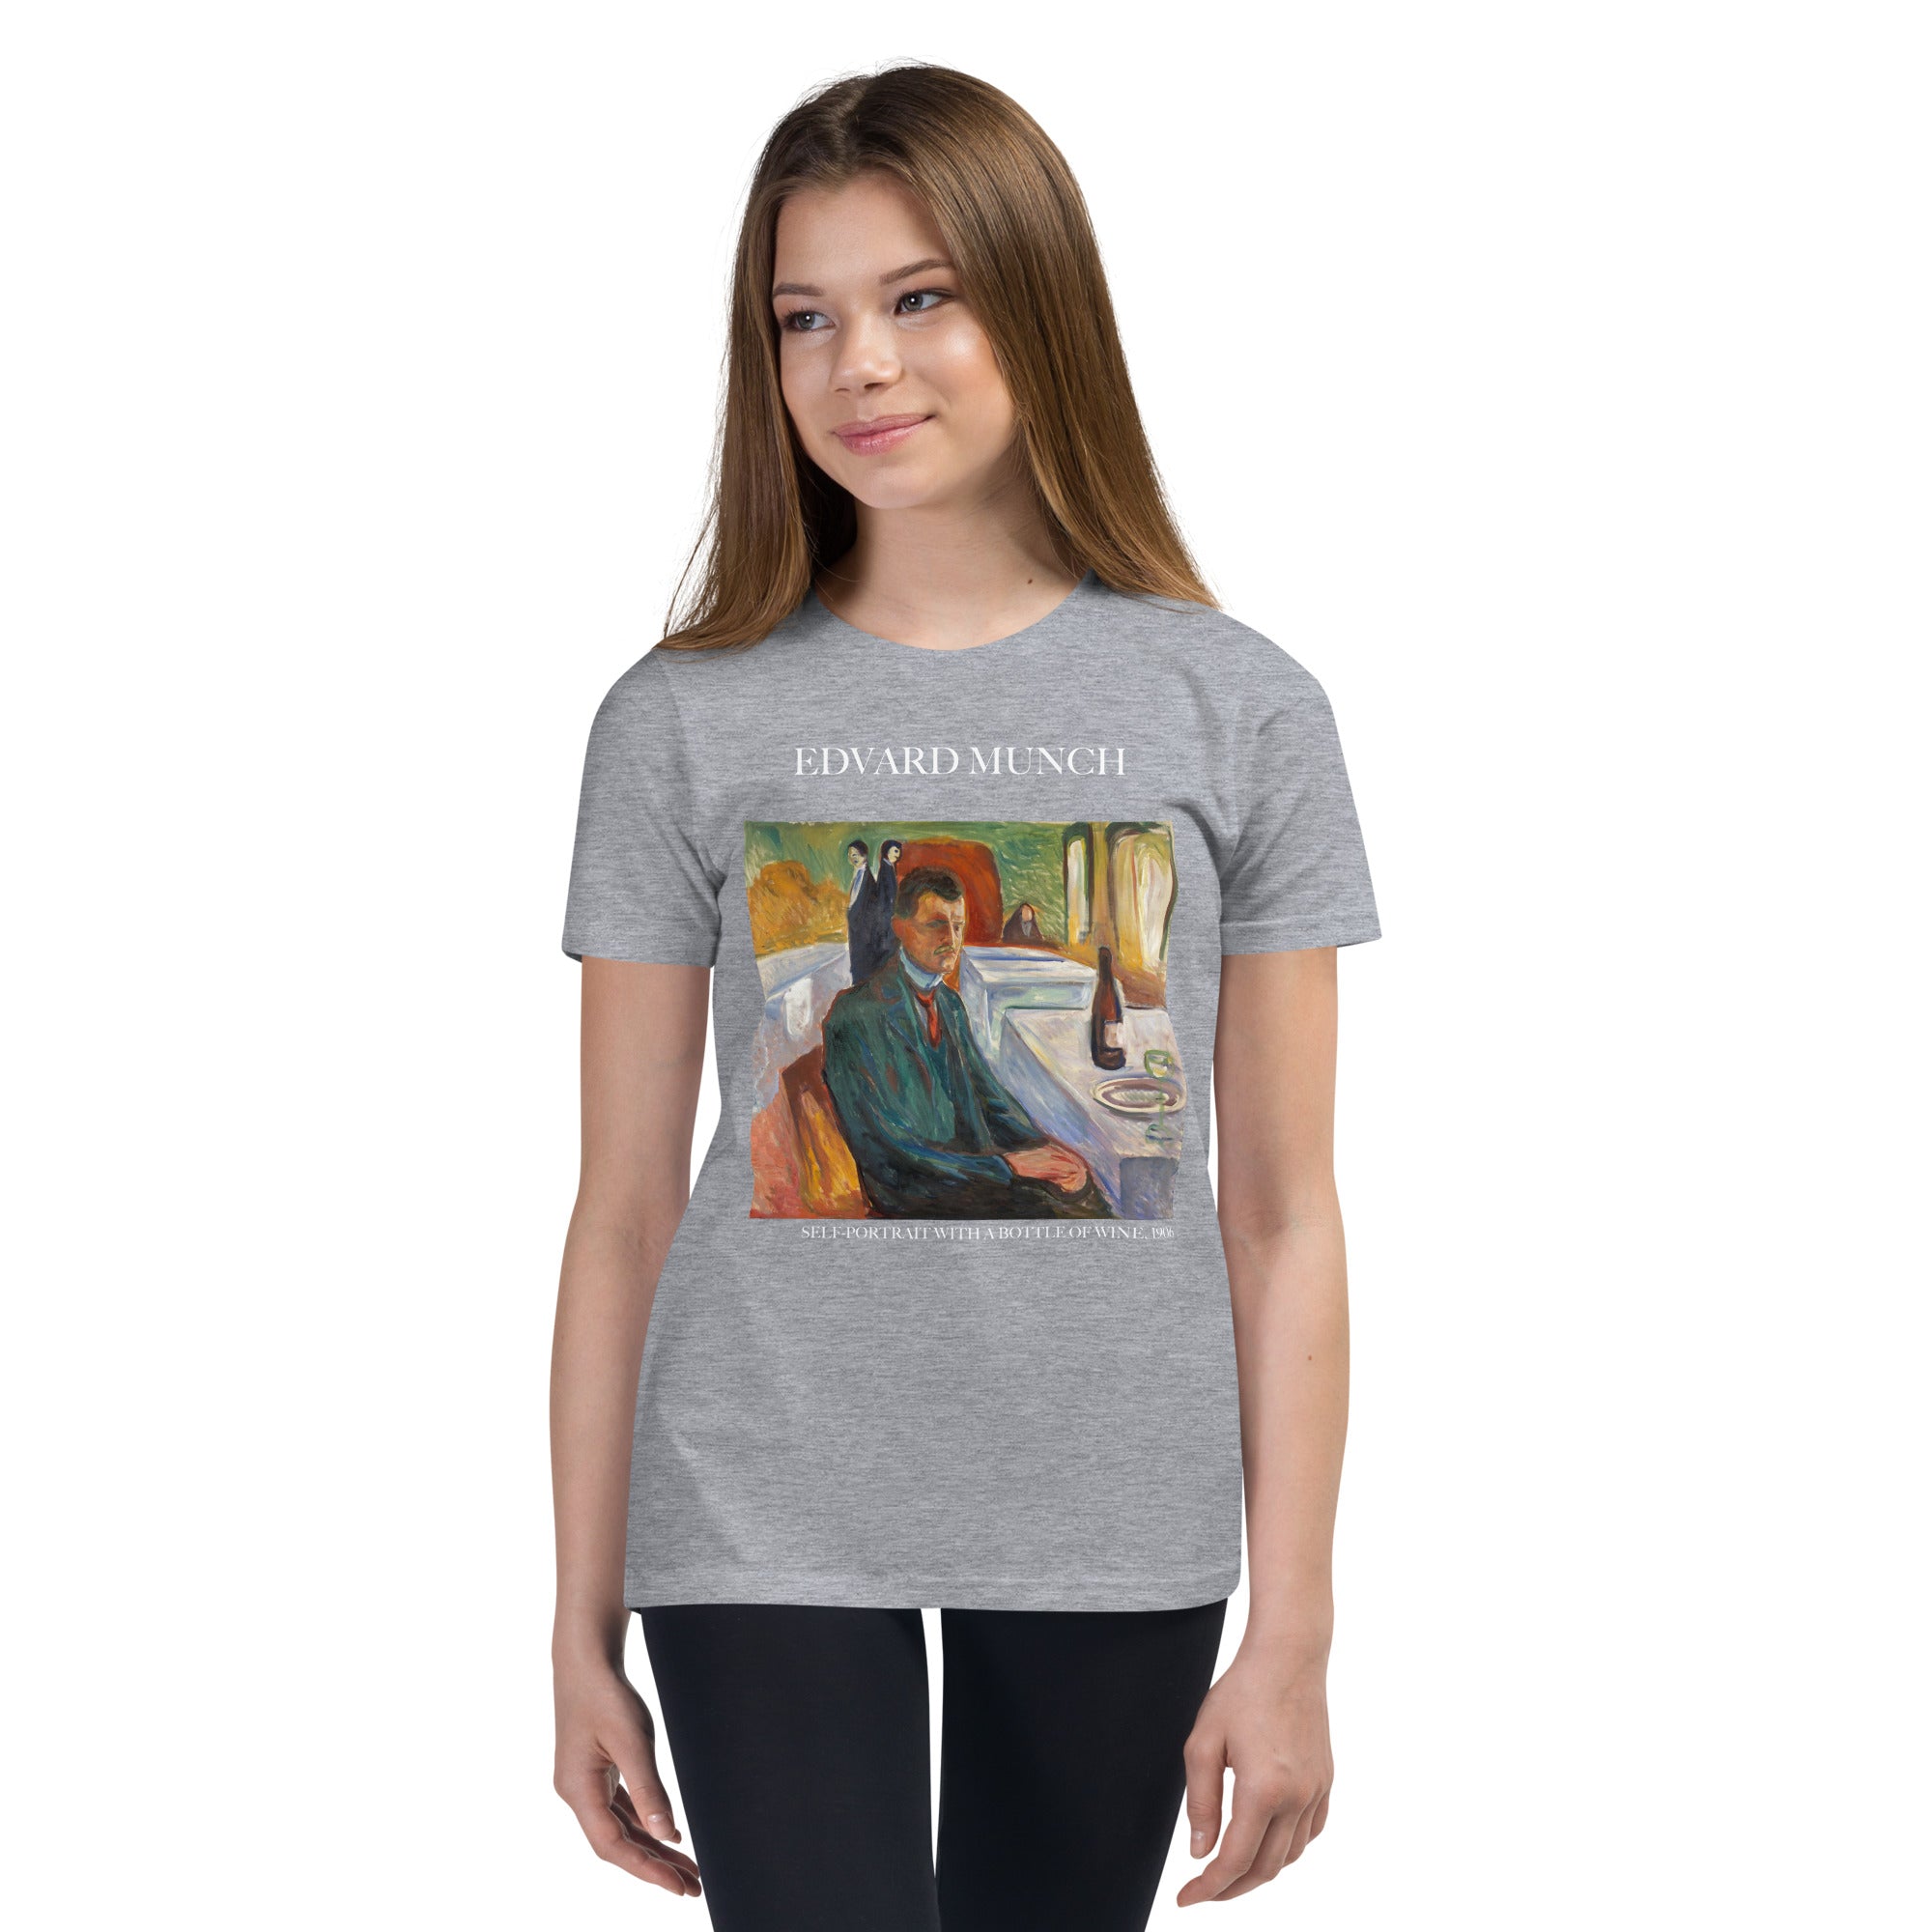 Edvard Munch 'Self-Portrait with a Bottle of Wine' Famous Painting Short Sleeve T-Shirt | Premium Youth Art Tee